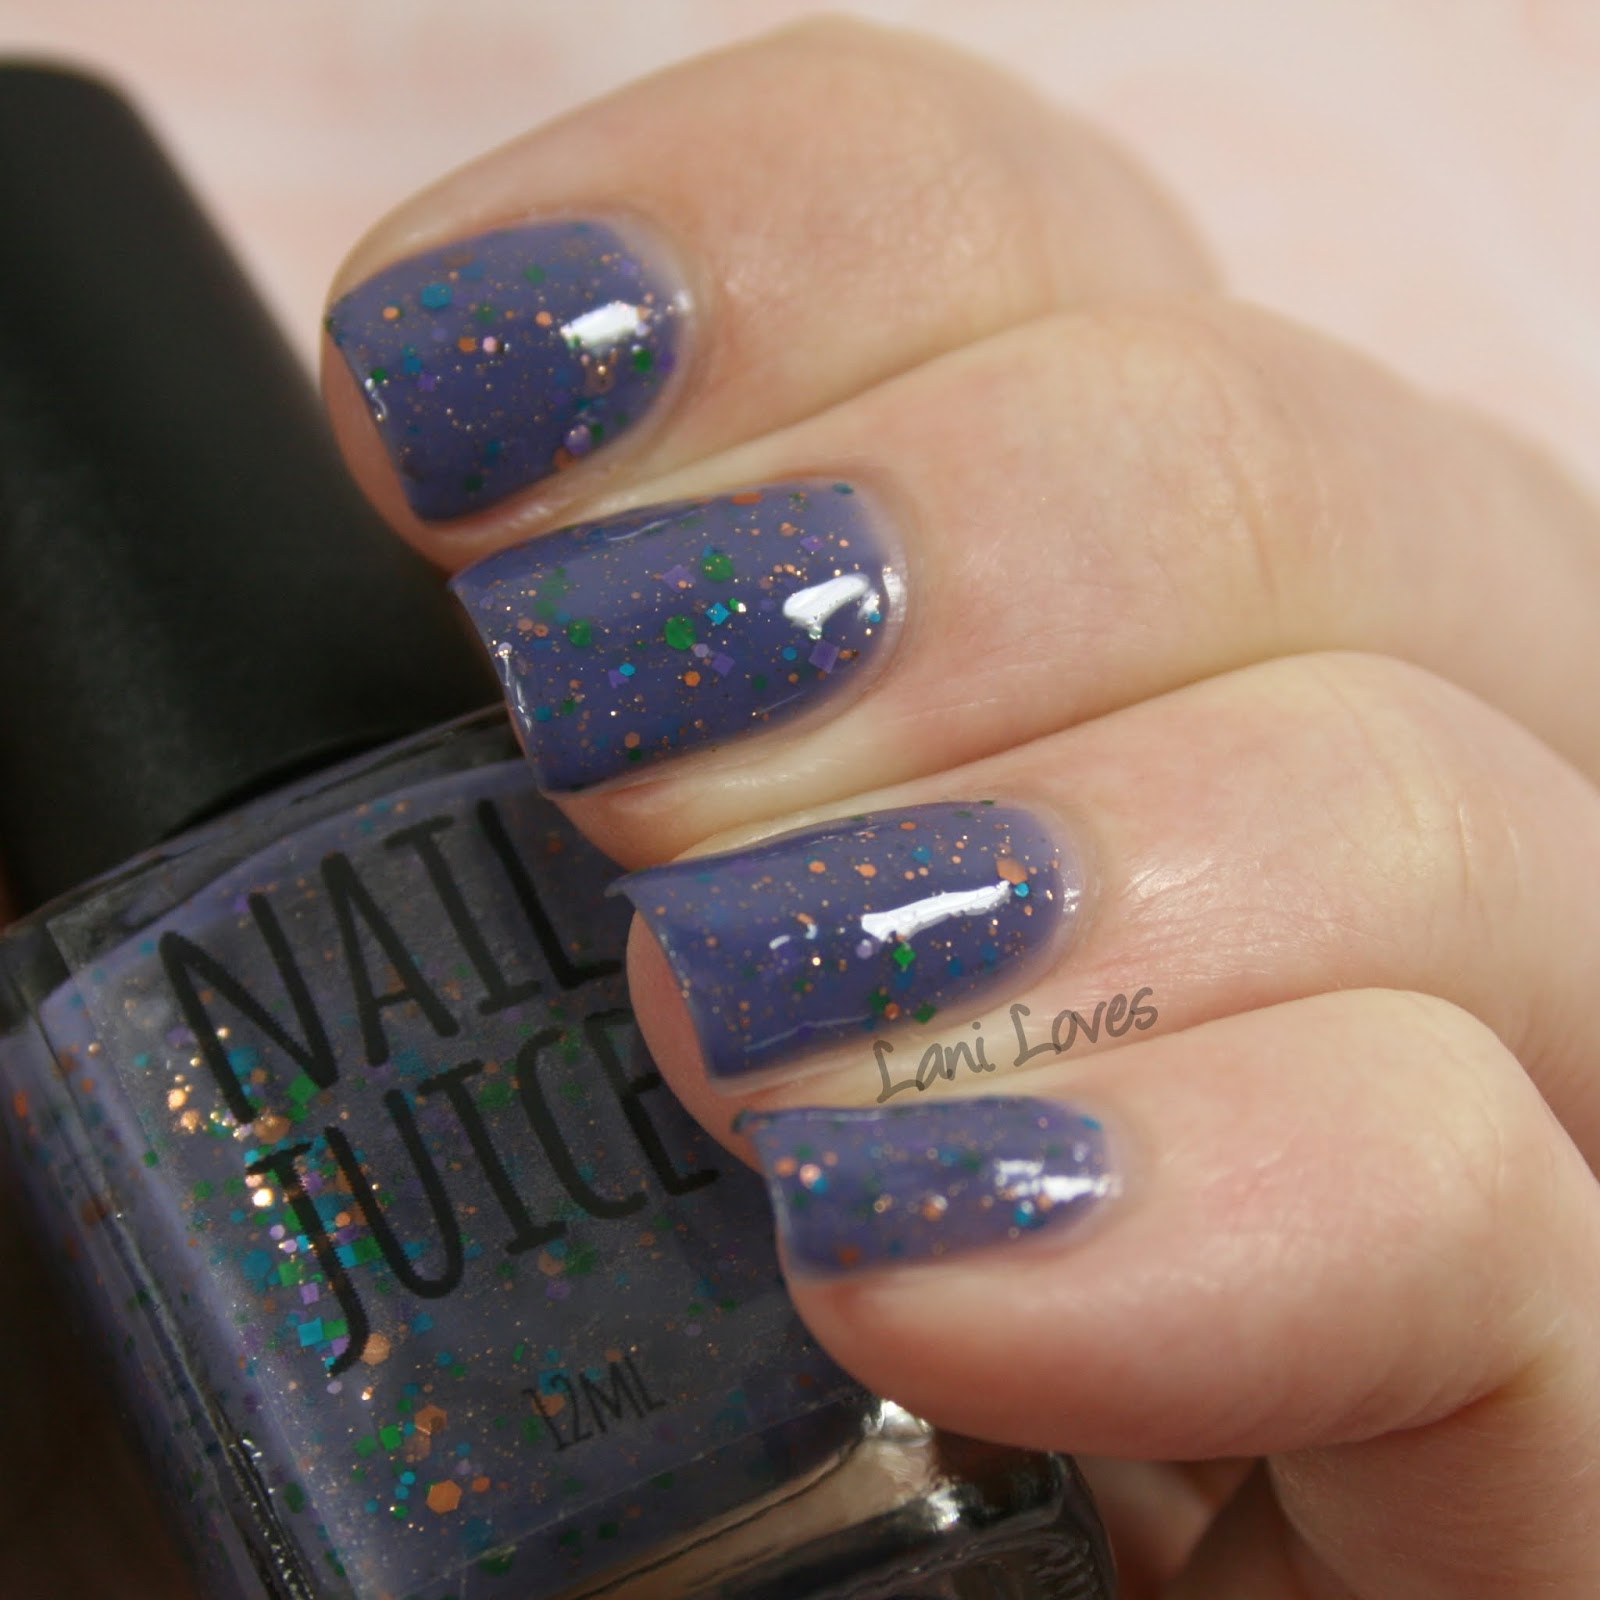 Nail Juice - Fairy Dust Nail Polish Swatches & Review